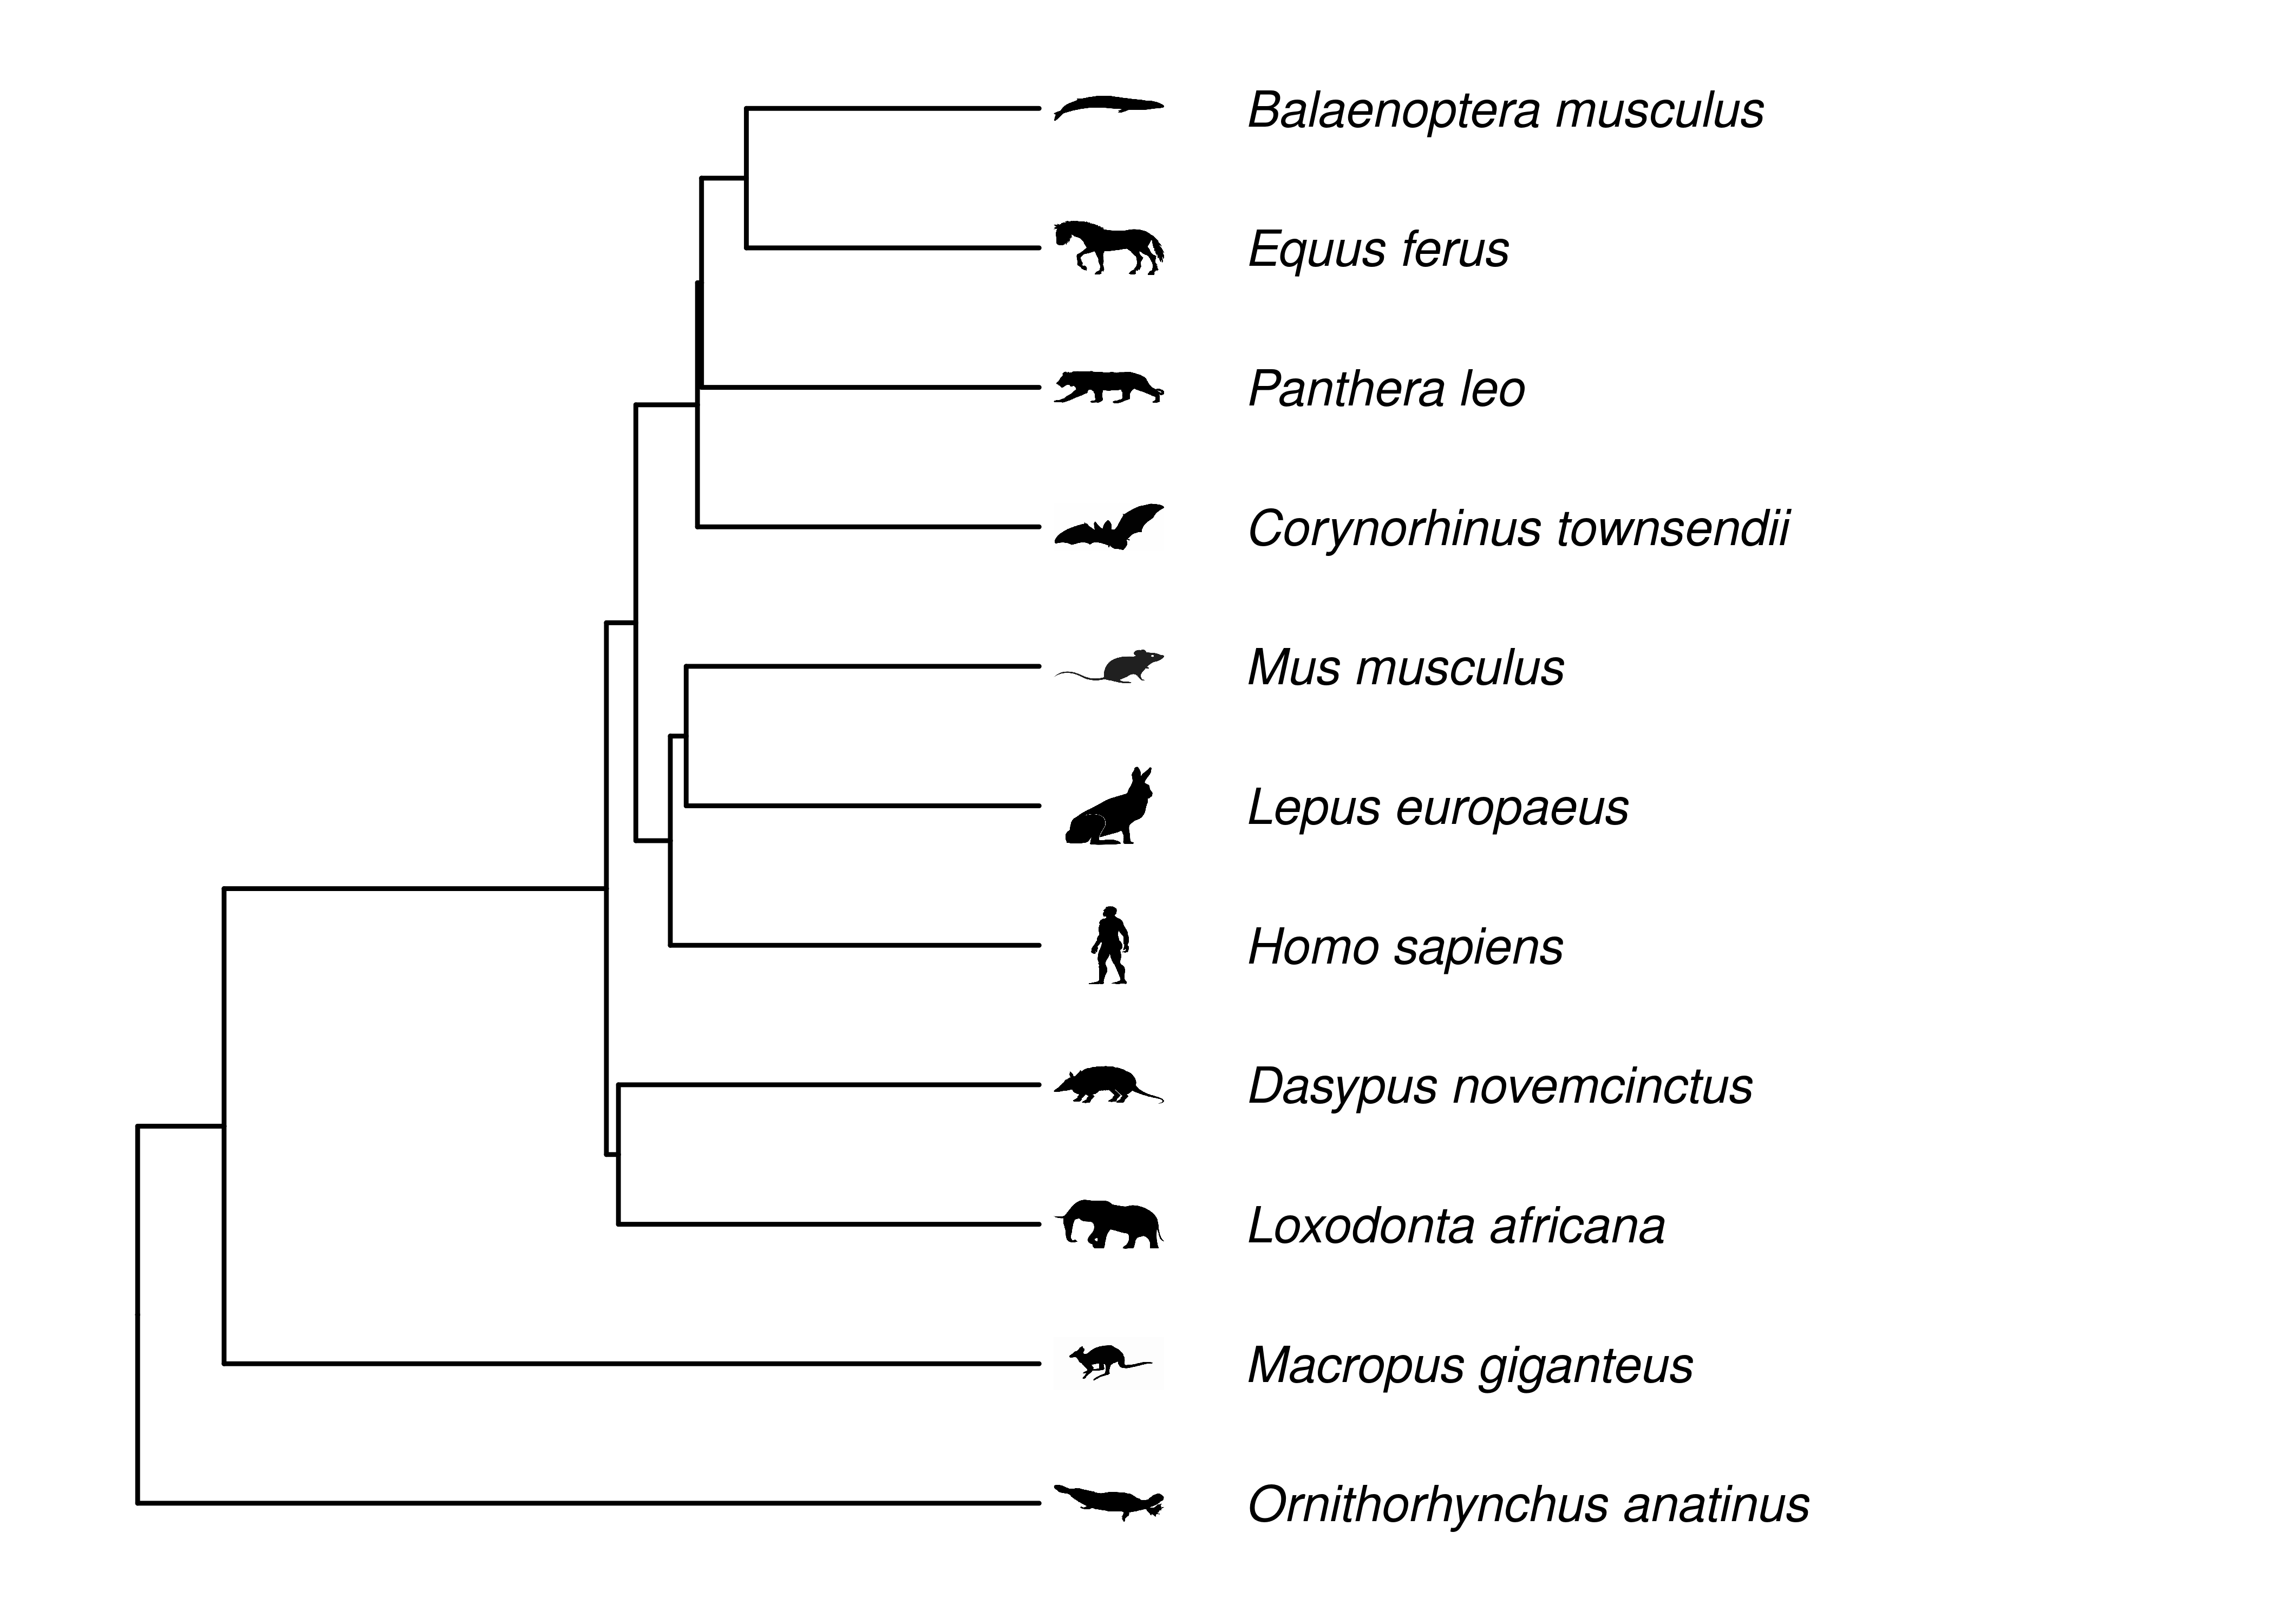 Phylogeny of some mammals. Topology and branch lengths  from http://vertlife.org.  The organism silhouettes are from http://phylopic.org/. Note that node circles are not drawn, instead nodes are implied at ends of branches.